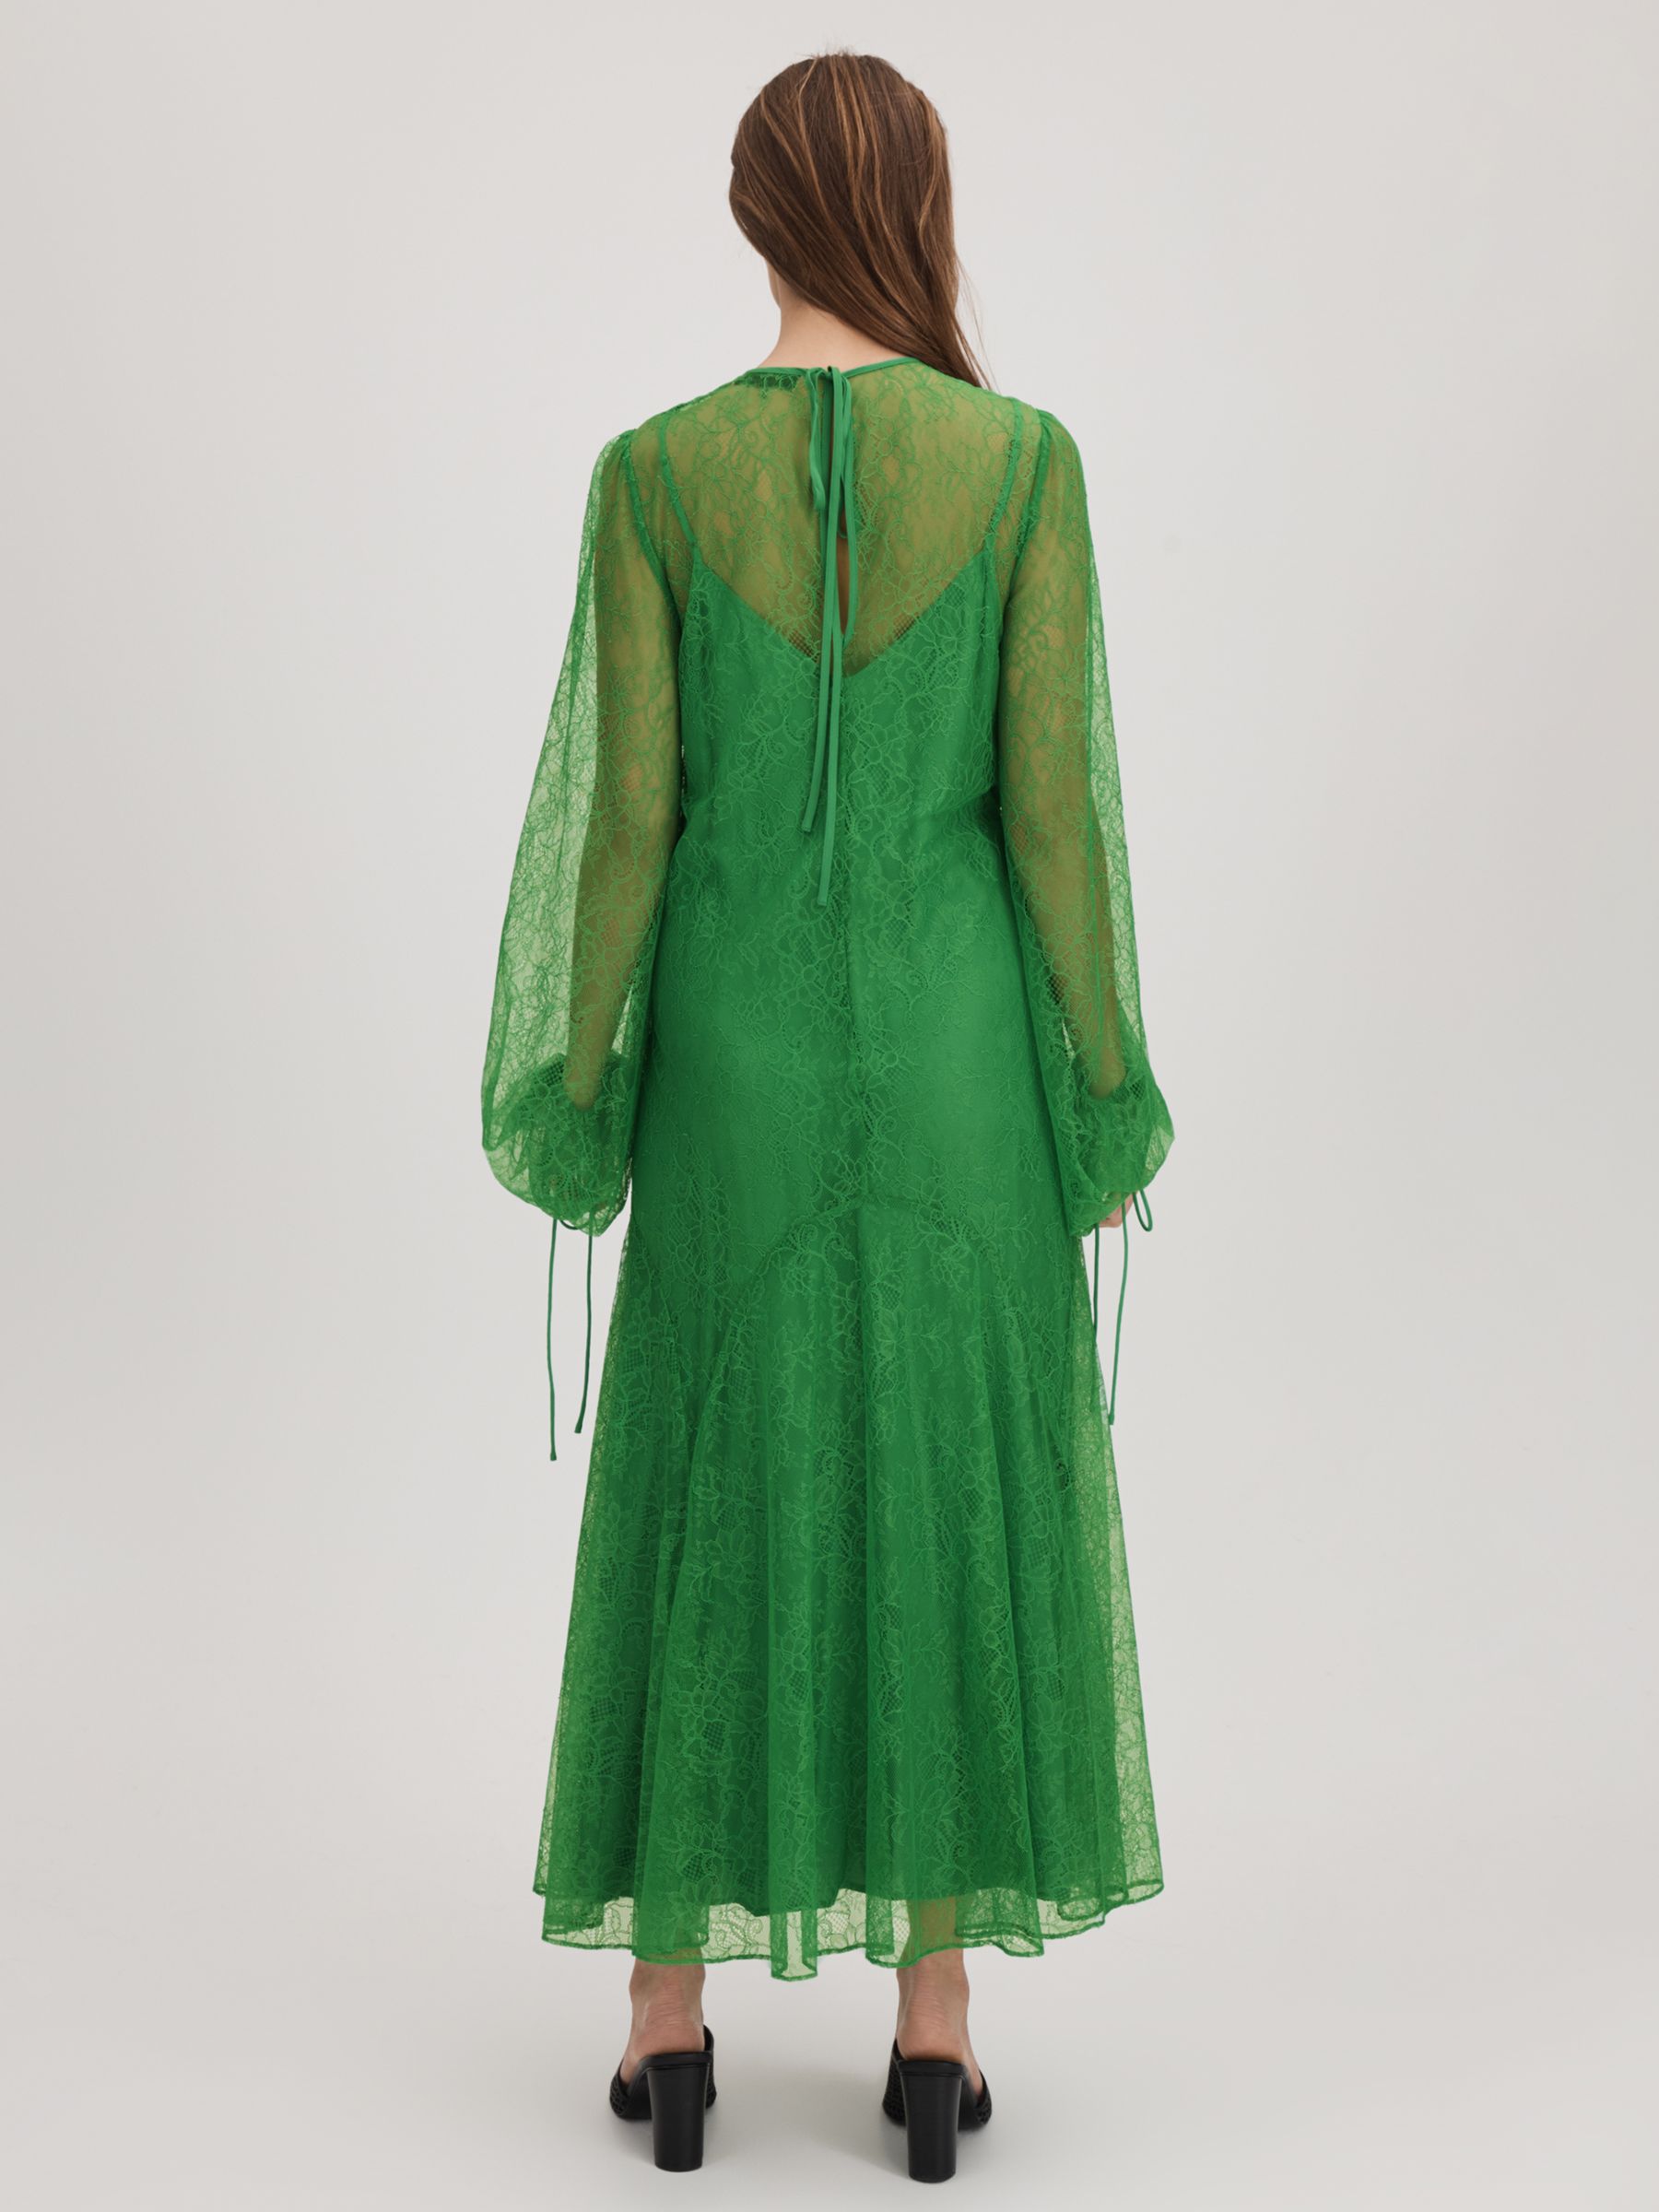 Buy FLORERE Lace Maxi Dress, Bright Green Online at johnlewis.com